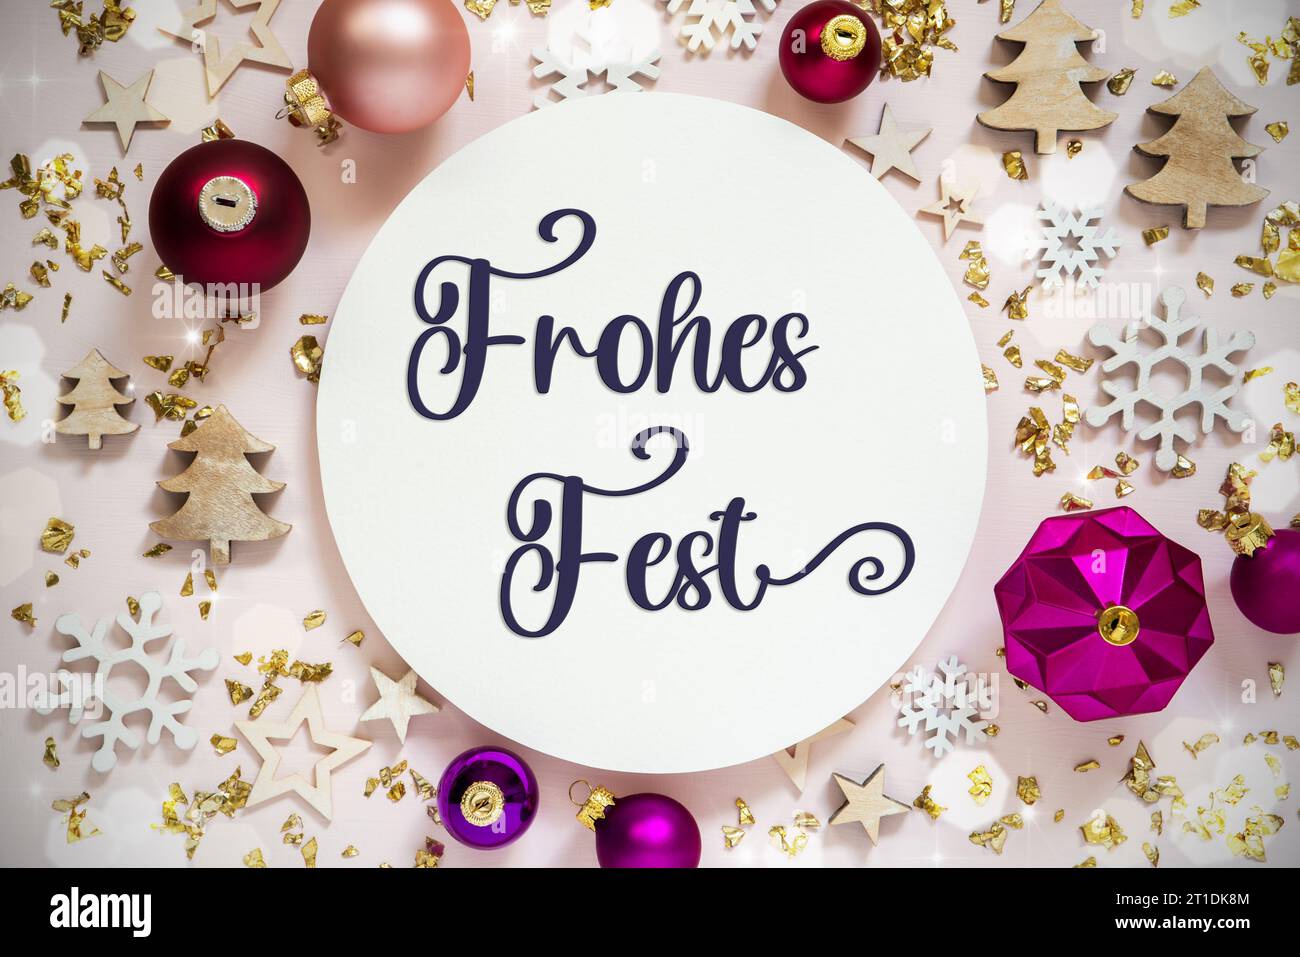 Text Frohes Fest, Means Happy Holidays, Purple Flatlay Christmas Decor Stock Photo